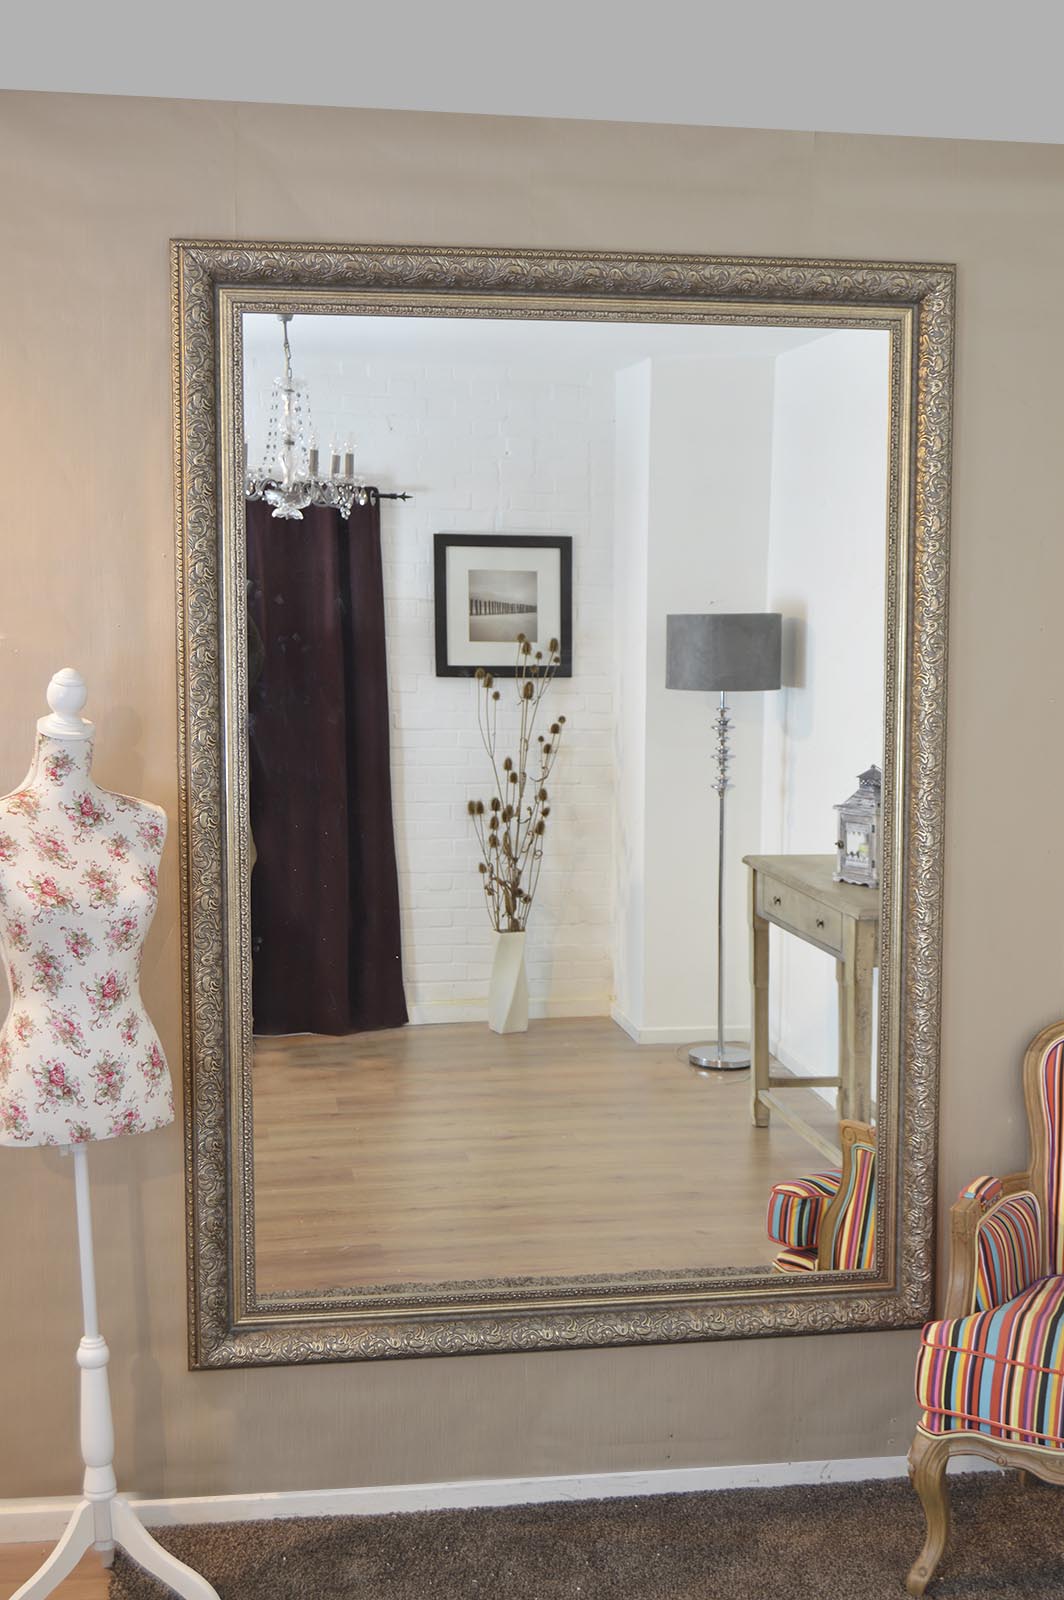 Framed Wall Mirrors: Reflections Of Style And Elegance